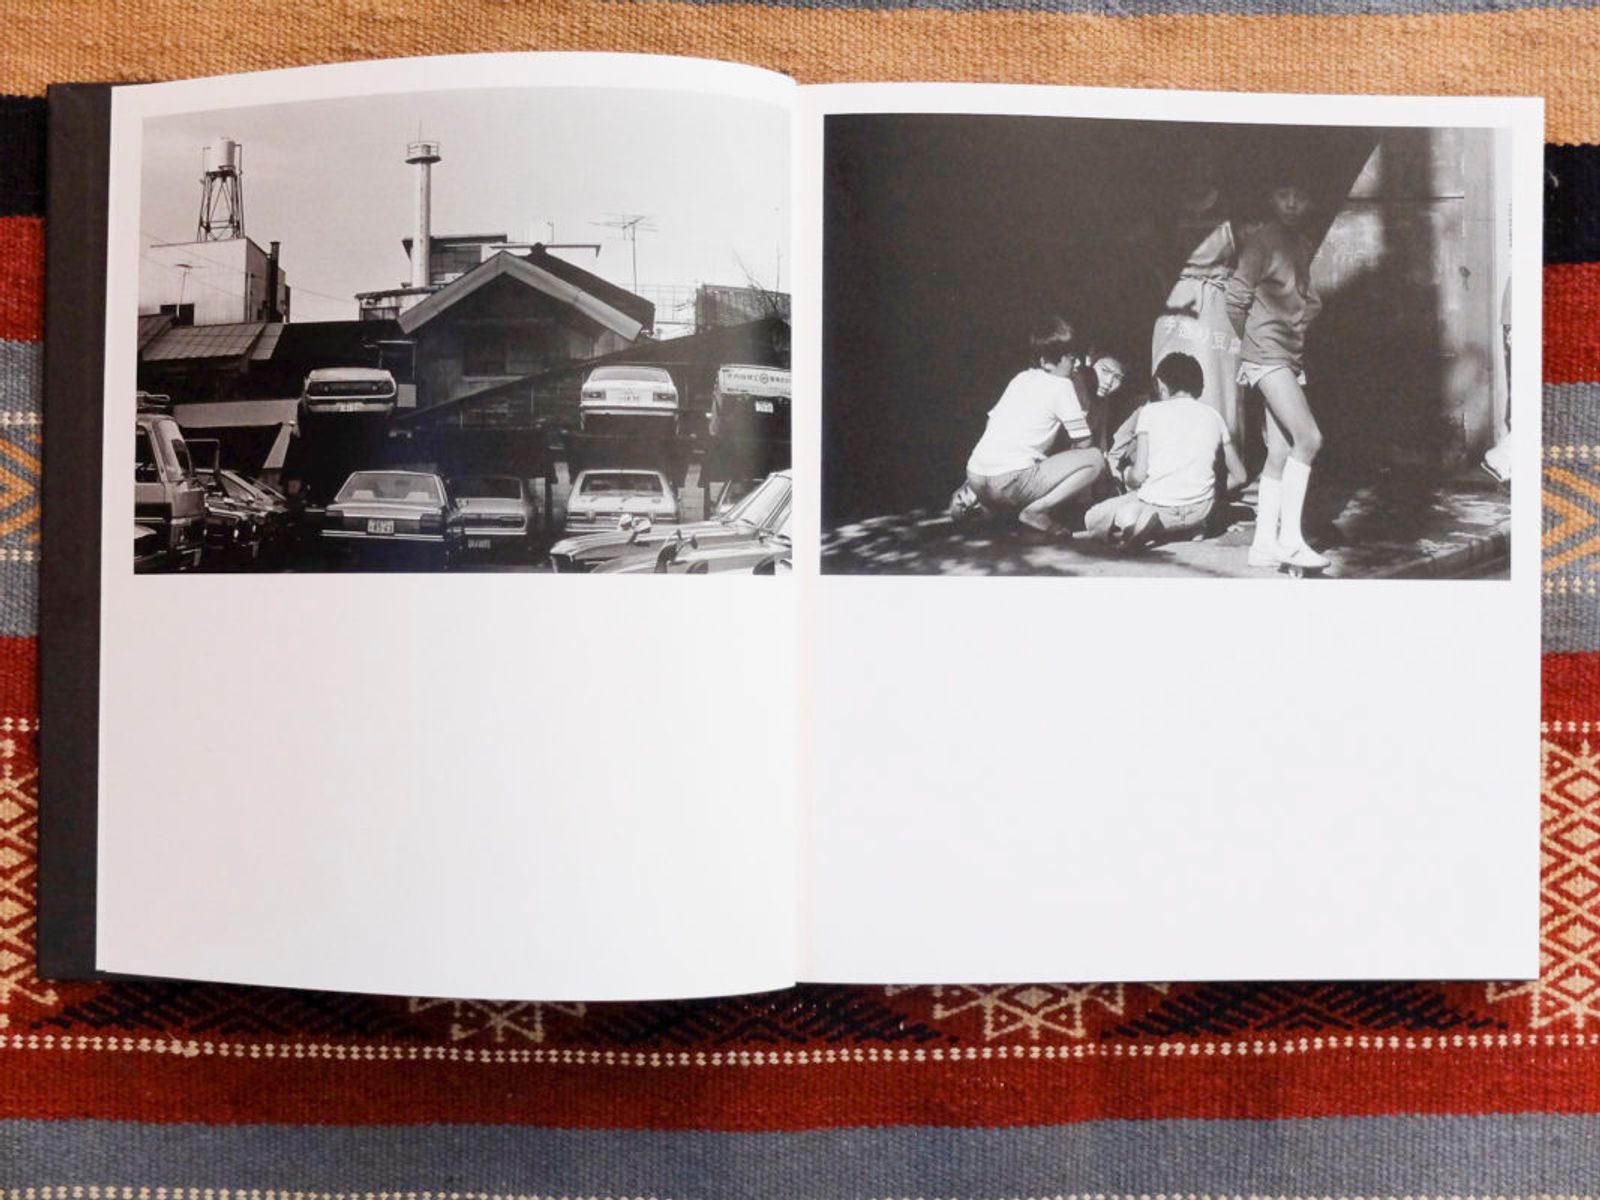 © Leporello Books - Image from the 78 by Issei Suda photography project